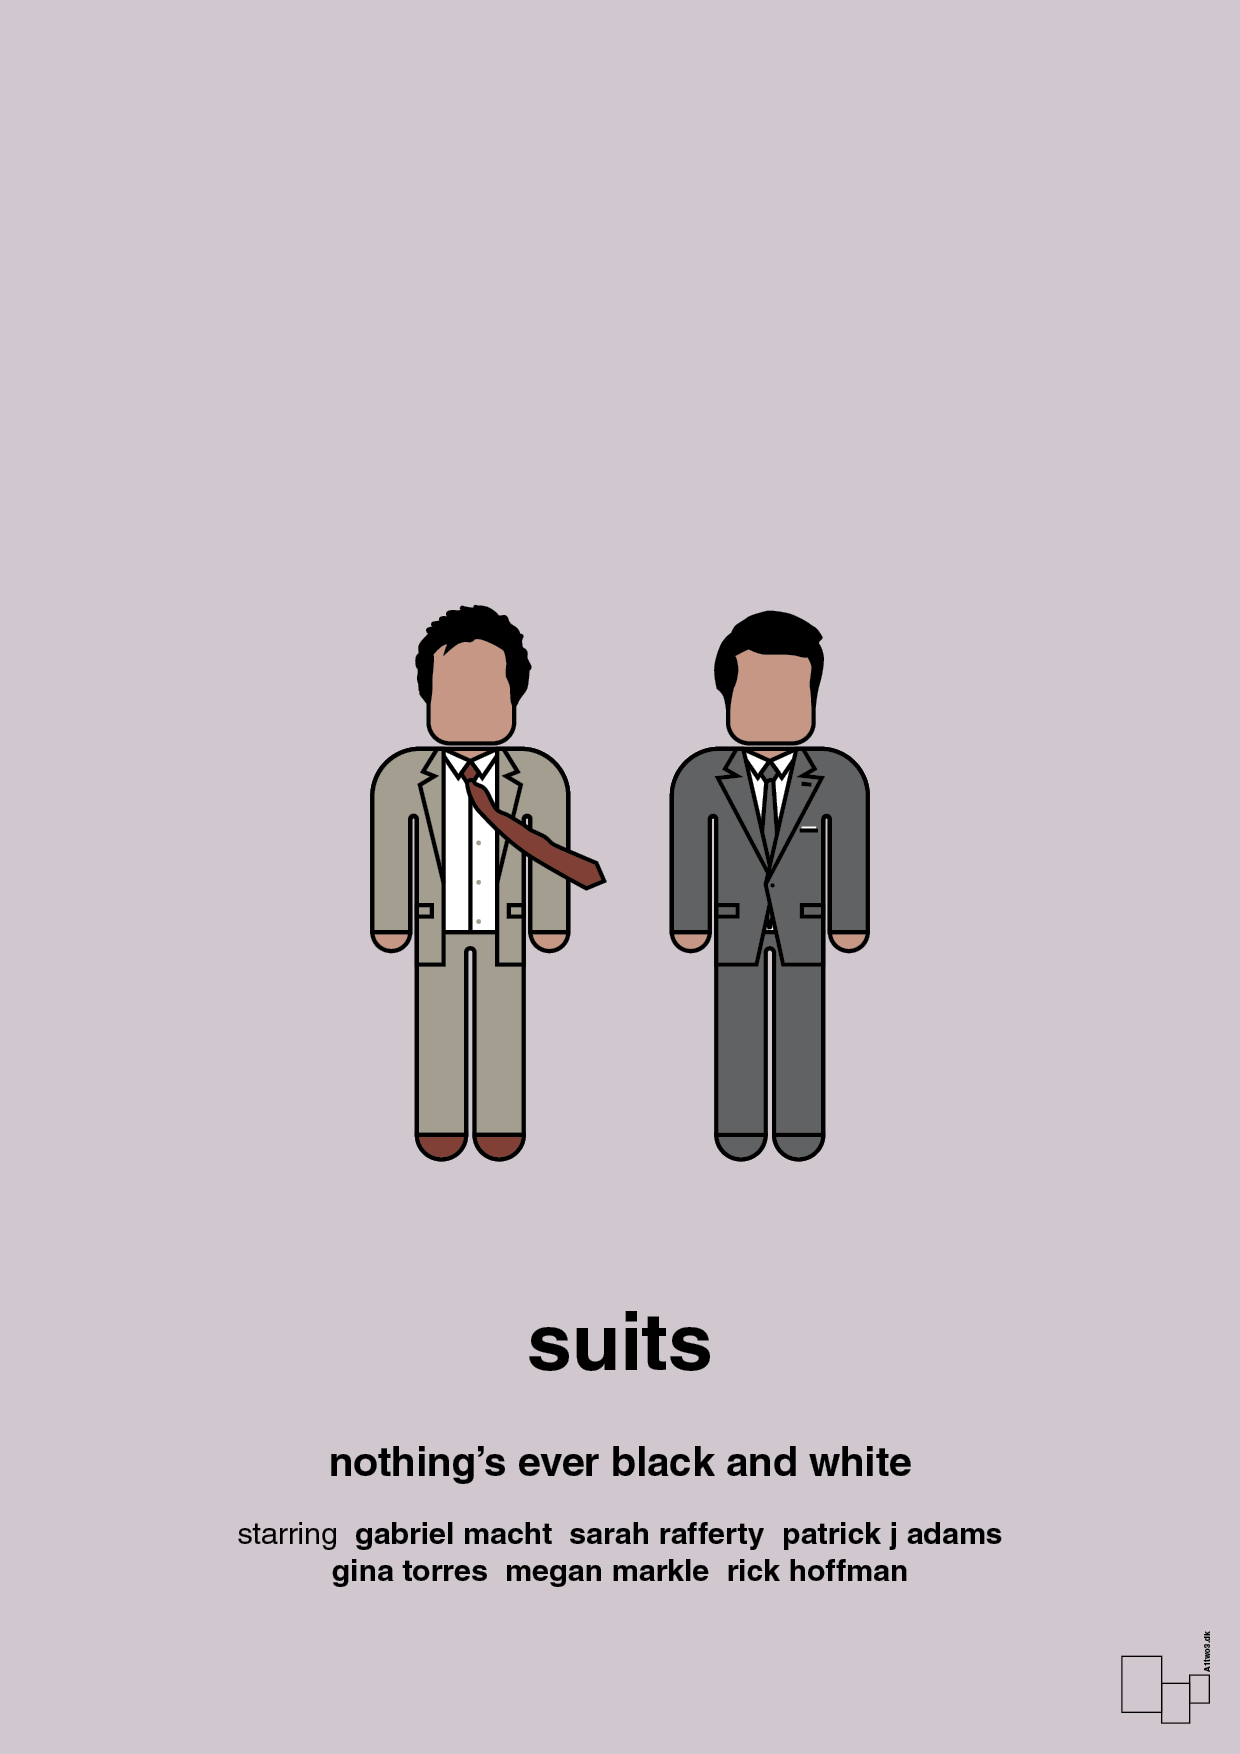 suits - Plakat med Film & TV i Dusty Lilac